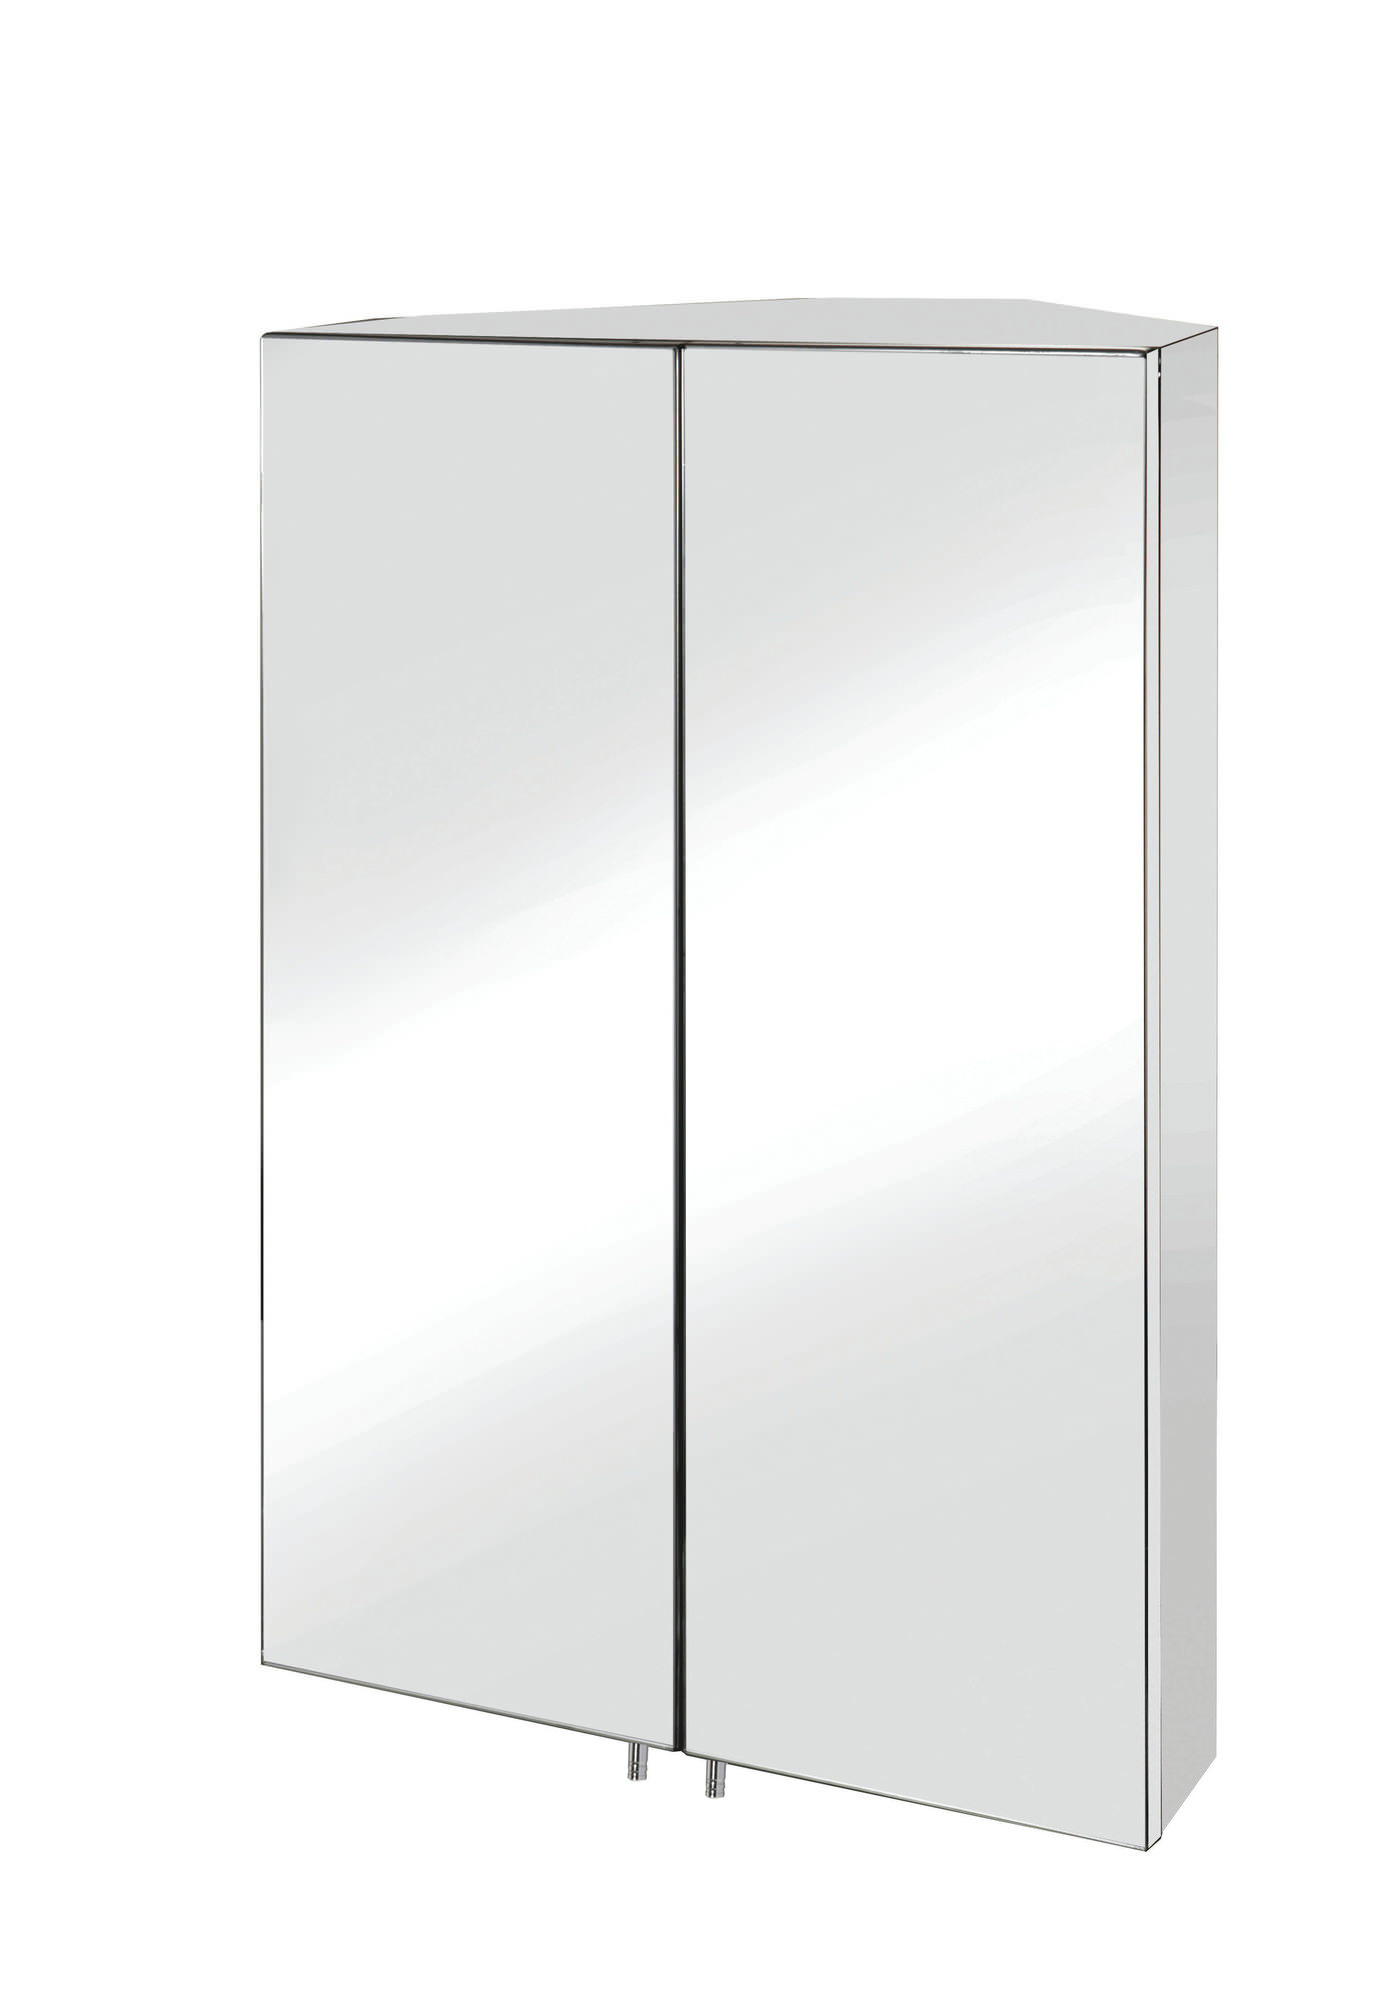 Croydex Shire Double Door Stainless Steel Illuminated Mirror Cabinet with Shaver Socket 